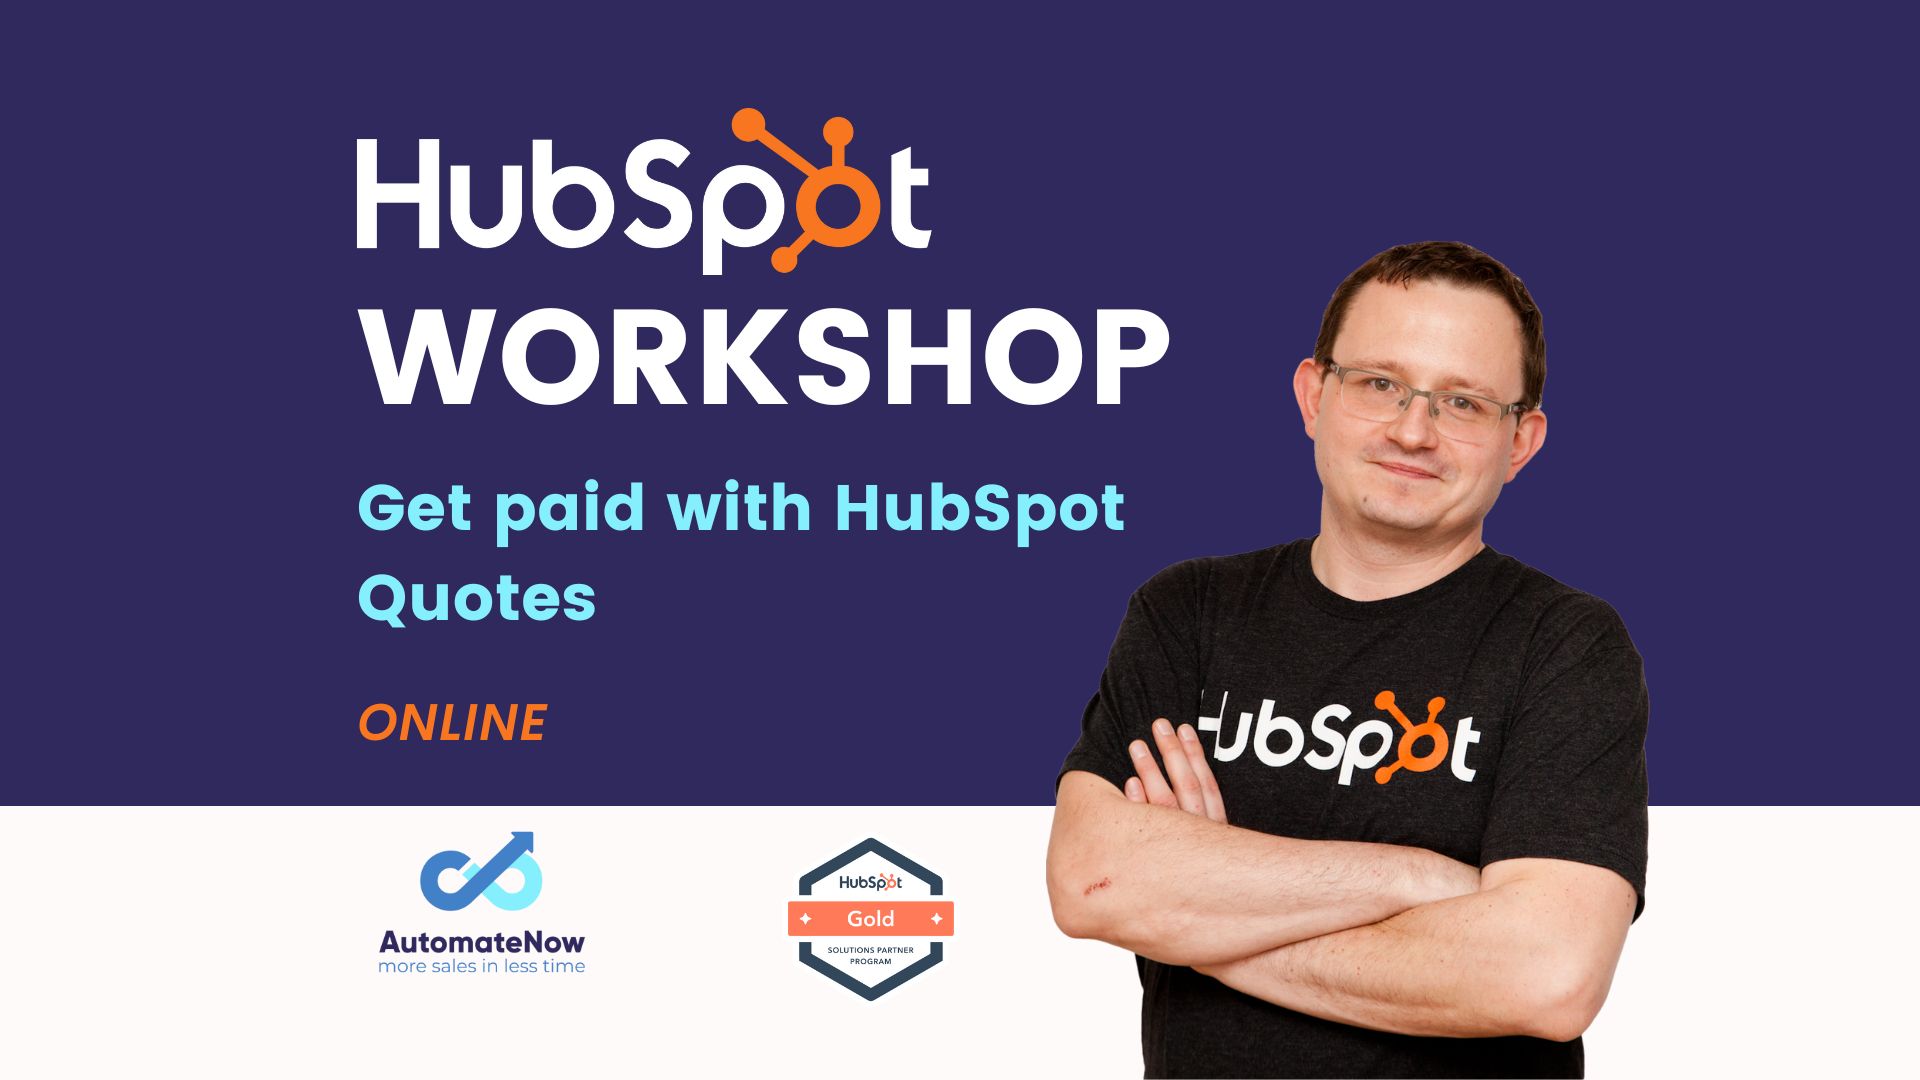 Get paid with HubSpot Quotes (Online Workshop)